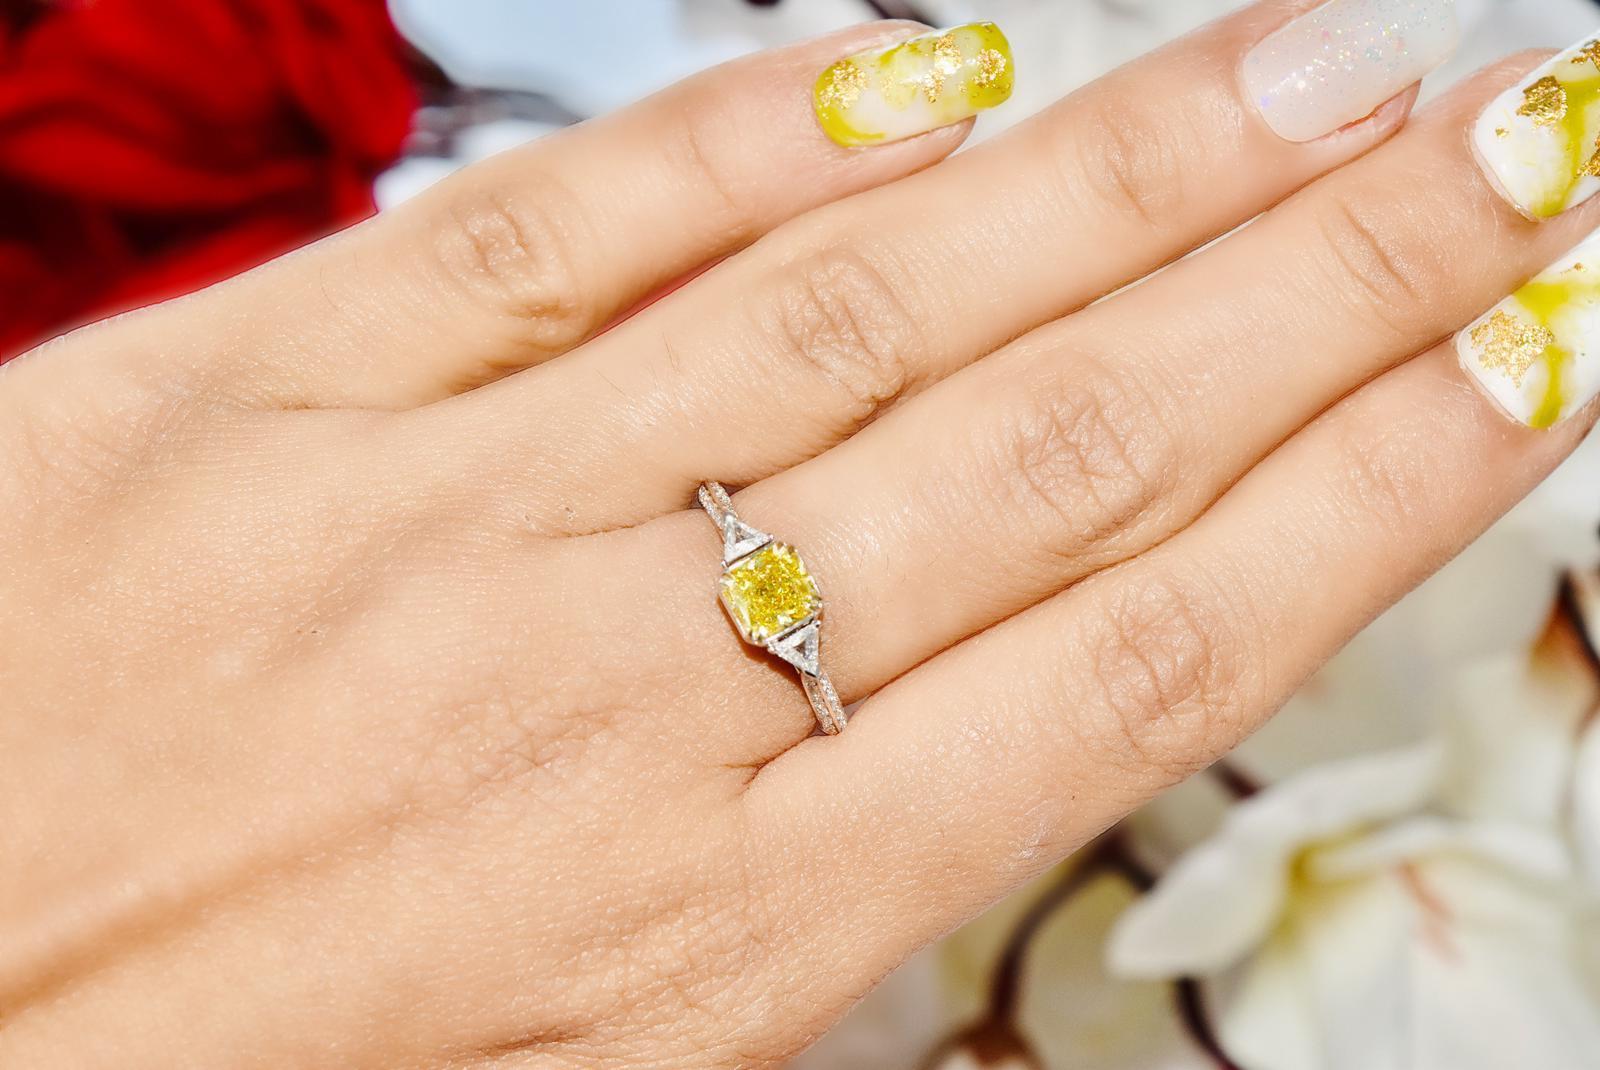 Radiant Cut GIA Certified 1.01 Carat Fancy Deep Yellow Diamond Ring VS2 Clarity For Sale